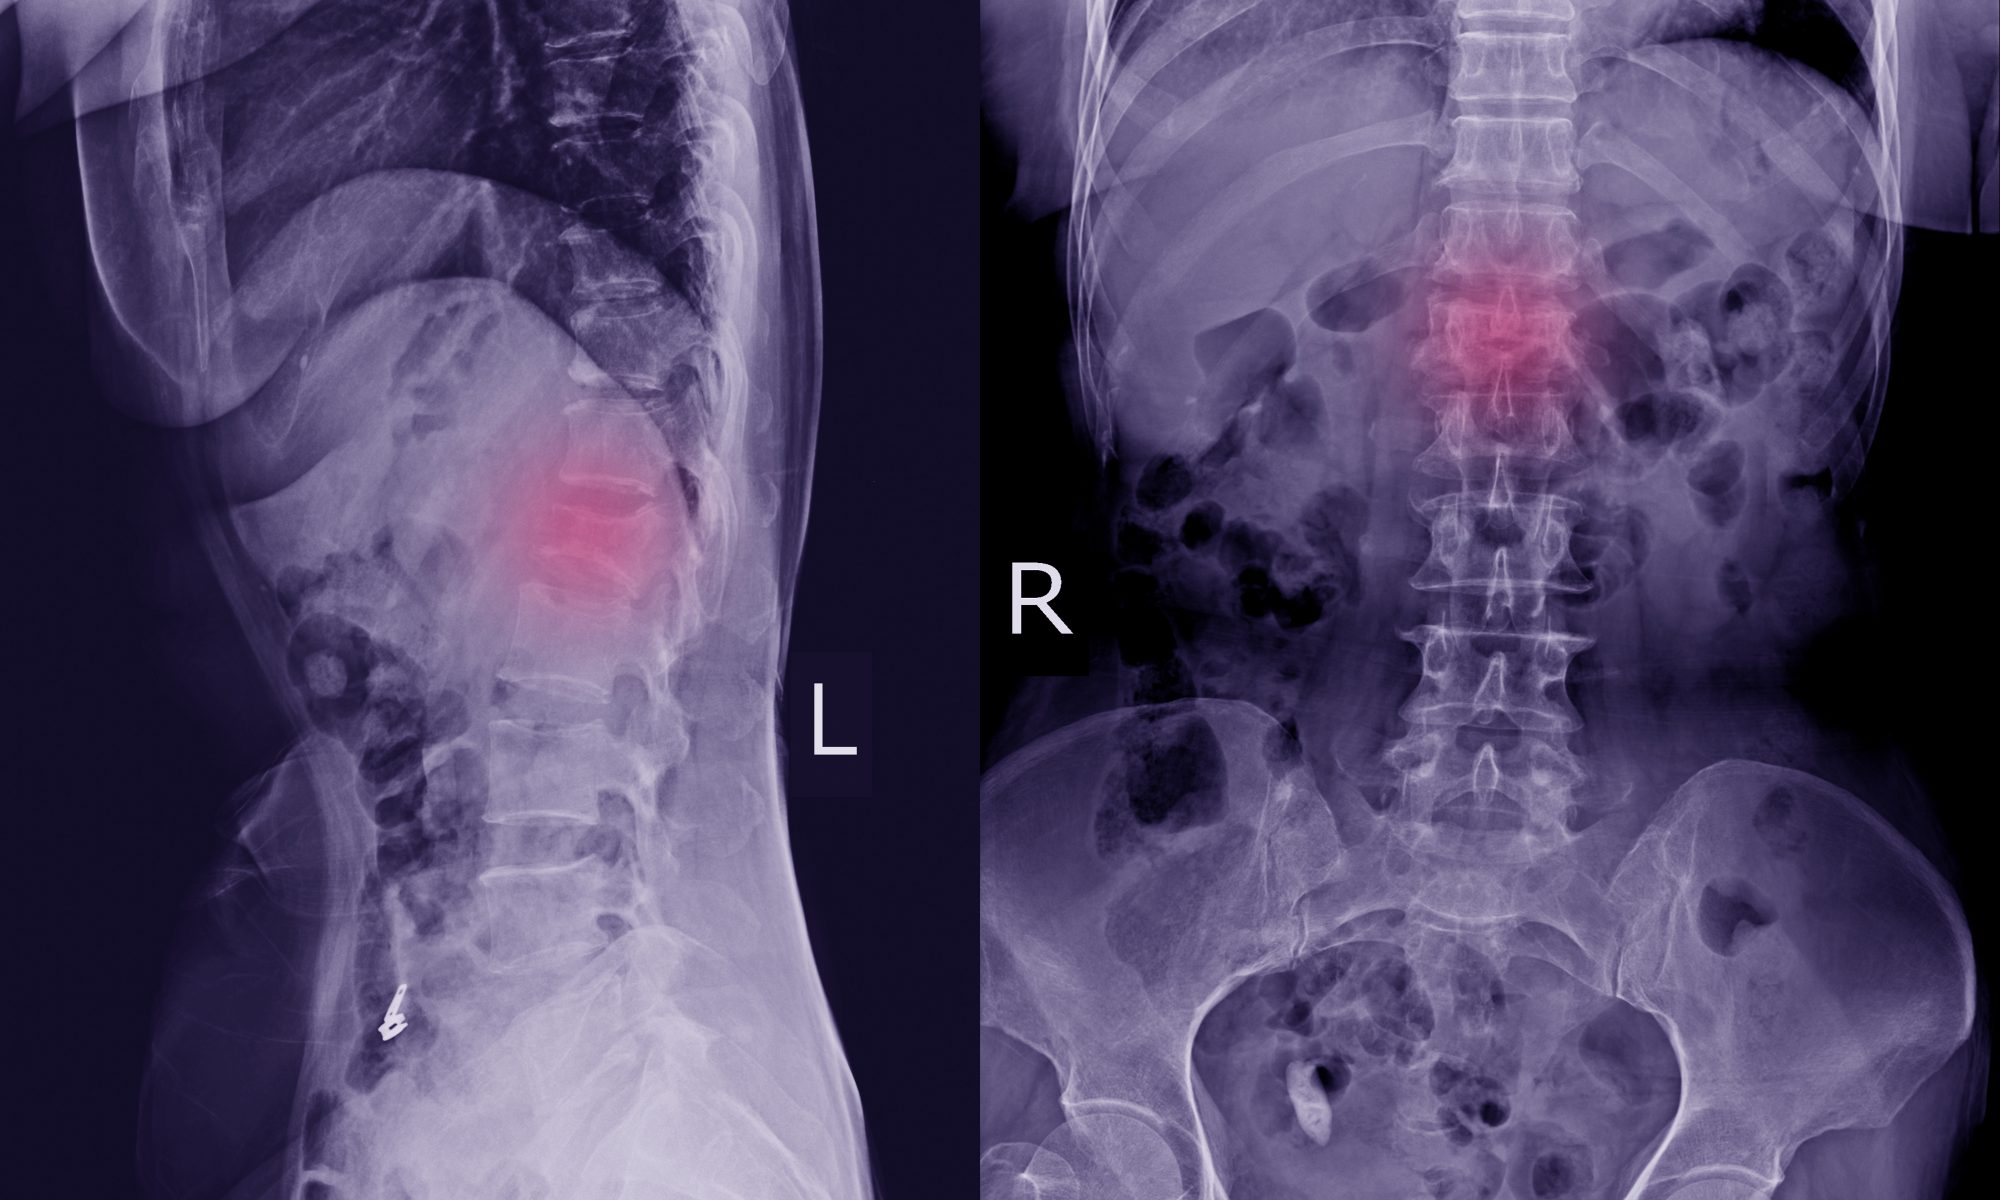 X-ray L-S Spine AP,LATERAL: Finding Moderate compression fracture of L1 vertebra and Lumbar spondylosis; blog: three types of spinal fracture